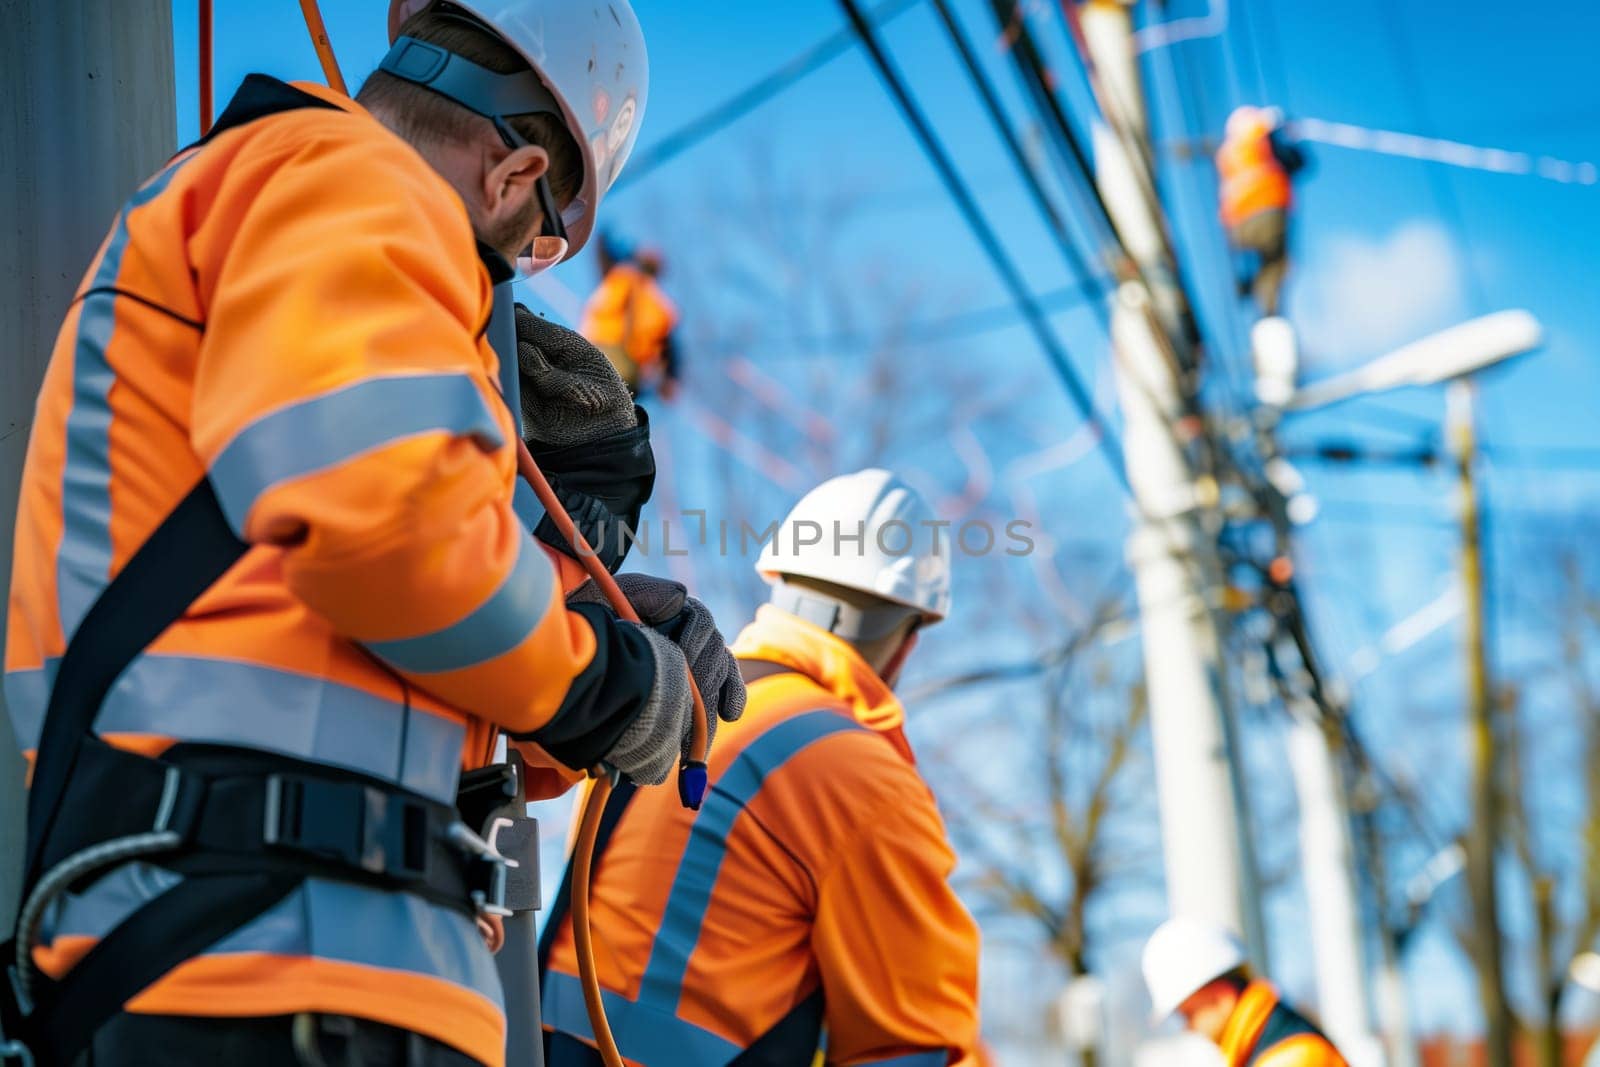 A group of bluecollar workers, including electricians and engineers, are working on a power line wearing hard hats, helmets, gloves, and workwear to ensure their safety under the open sky